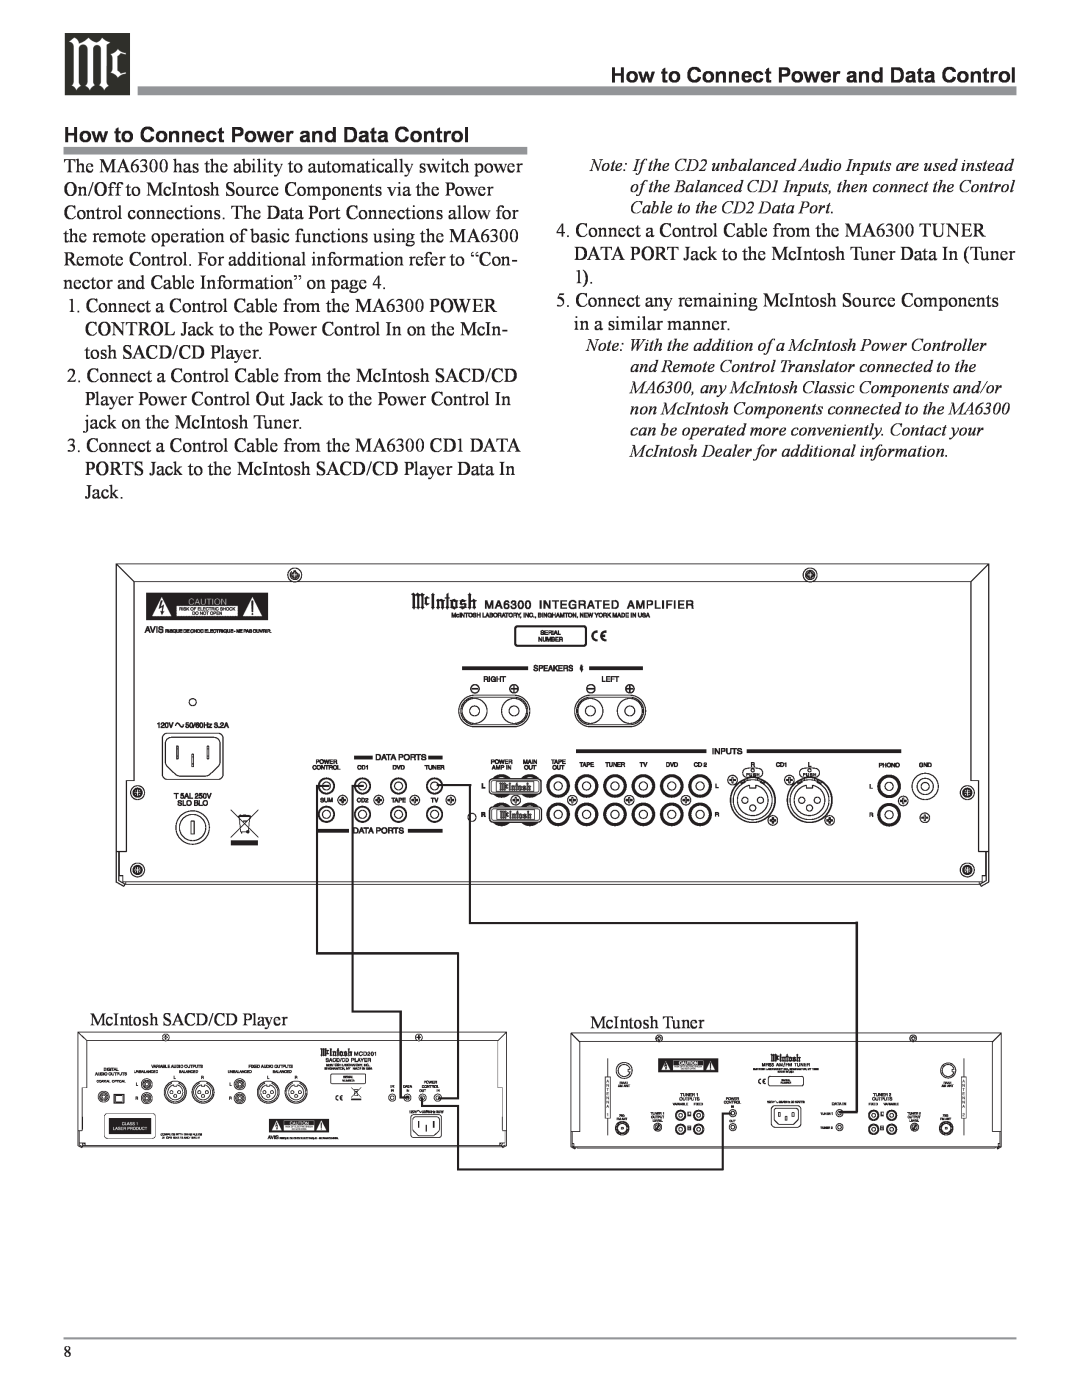 McIntosh MA6300 owner manual How to Connect Power and Data Control, McIntosh SACD/CD Player, McIntosh Tuner 